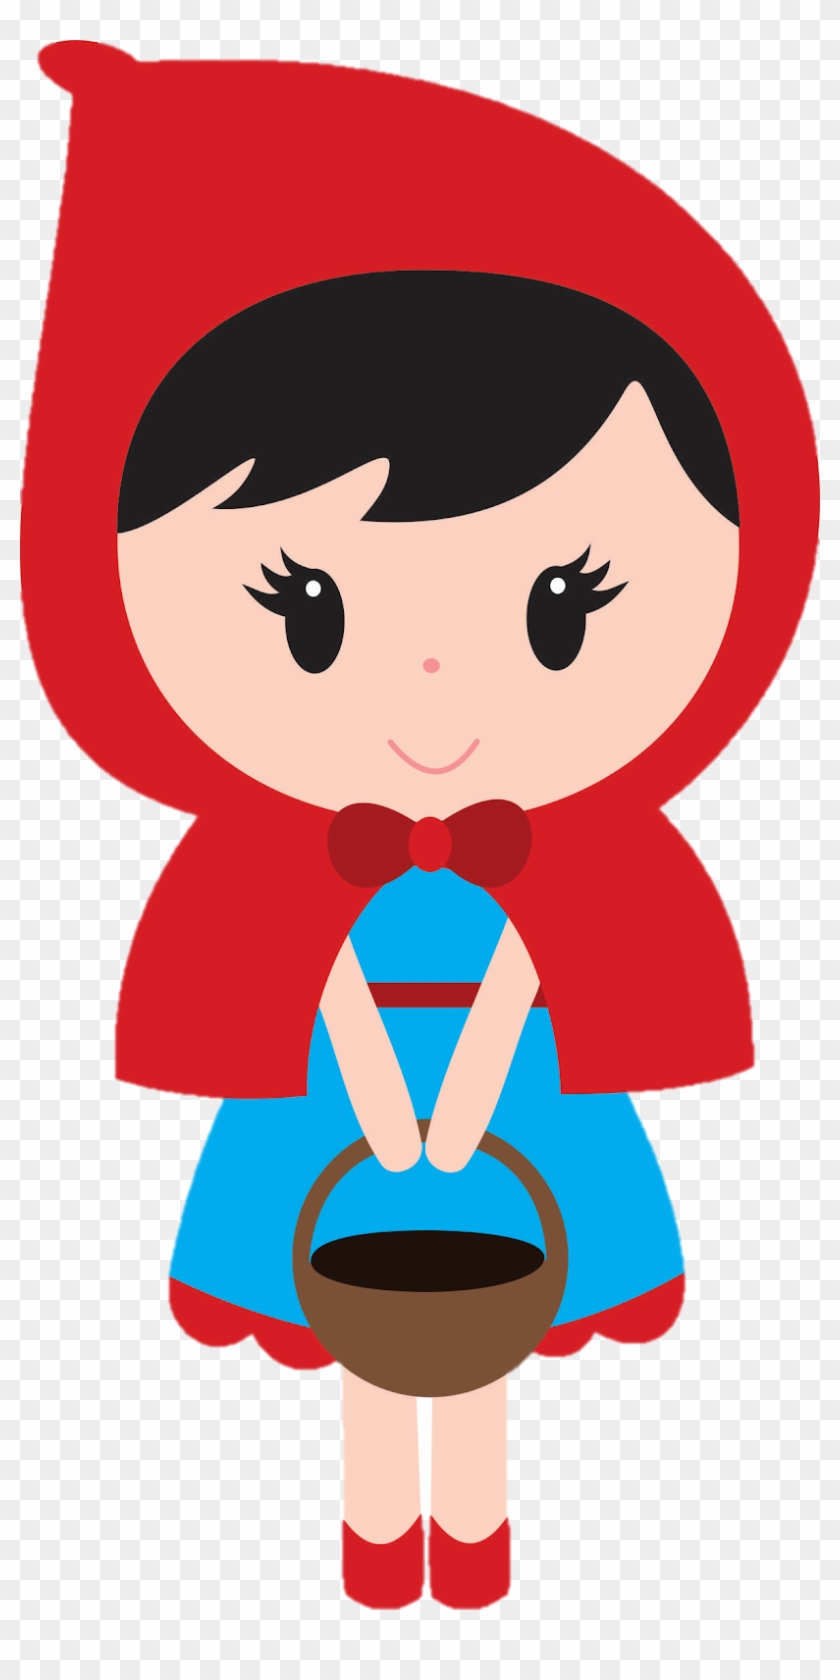 Svg Library Download Little Free Creationz Clip Art Little Red Riding Hood Hd Png Download 815x1600 Pngfind